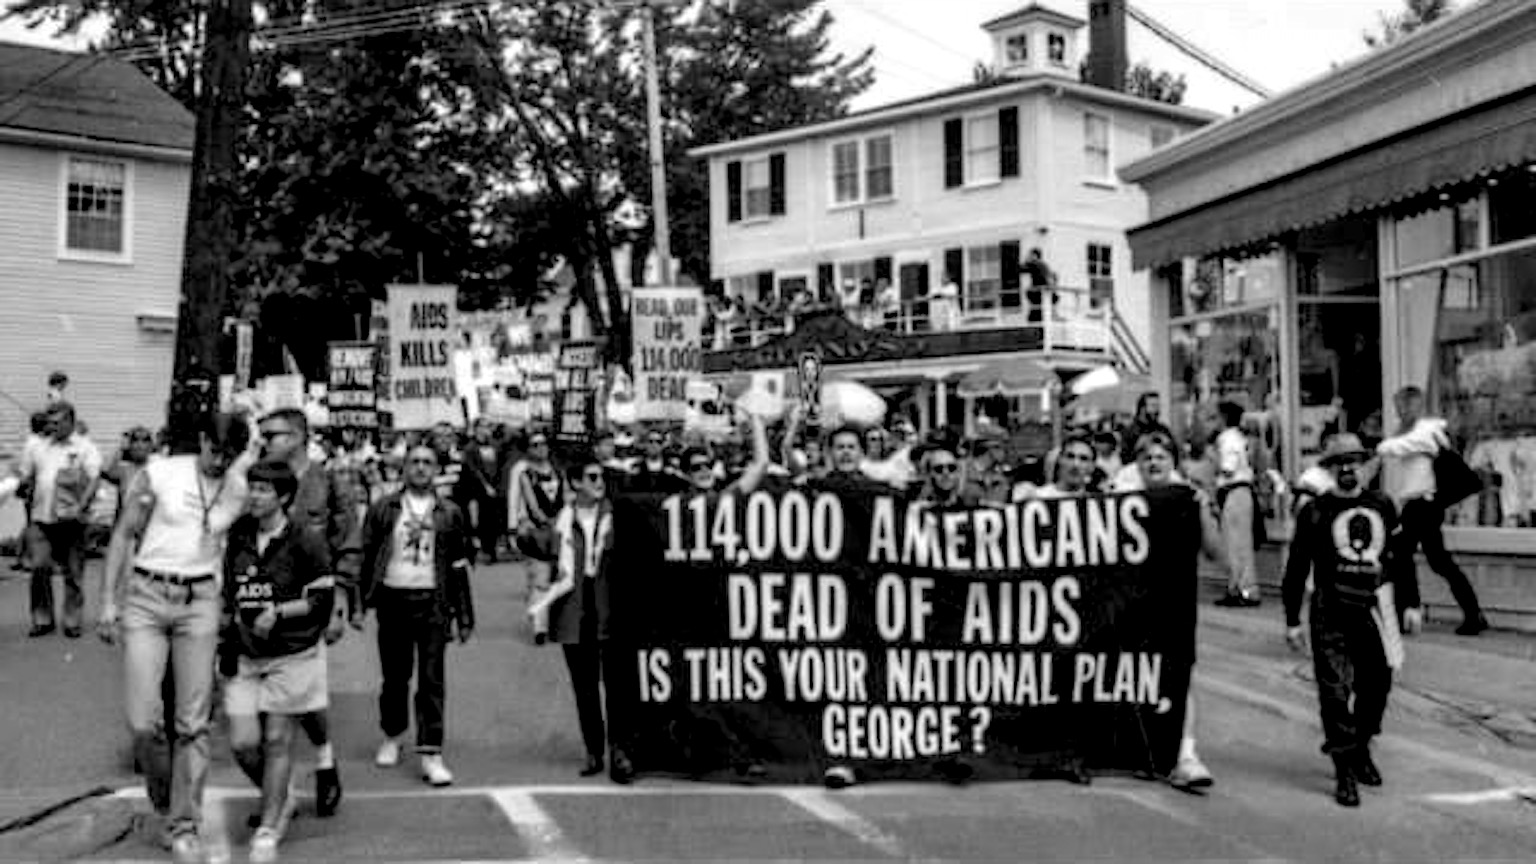 Eric Sawyer and fellow activists protesting against George Bush, Sr.’s inadequate response to the AIDS epidemic, Kennebunkport, ME. Their sign reads 114,000 Americans Dead of Aids. Is This Your National Plan, George?” Photo courtesy of Eric Sawyer.